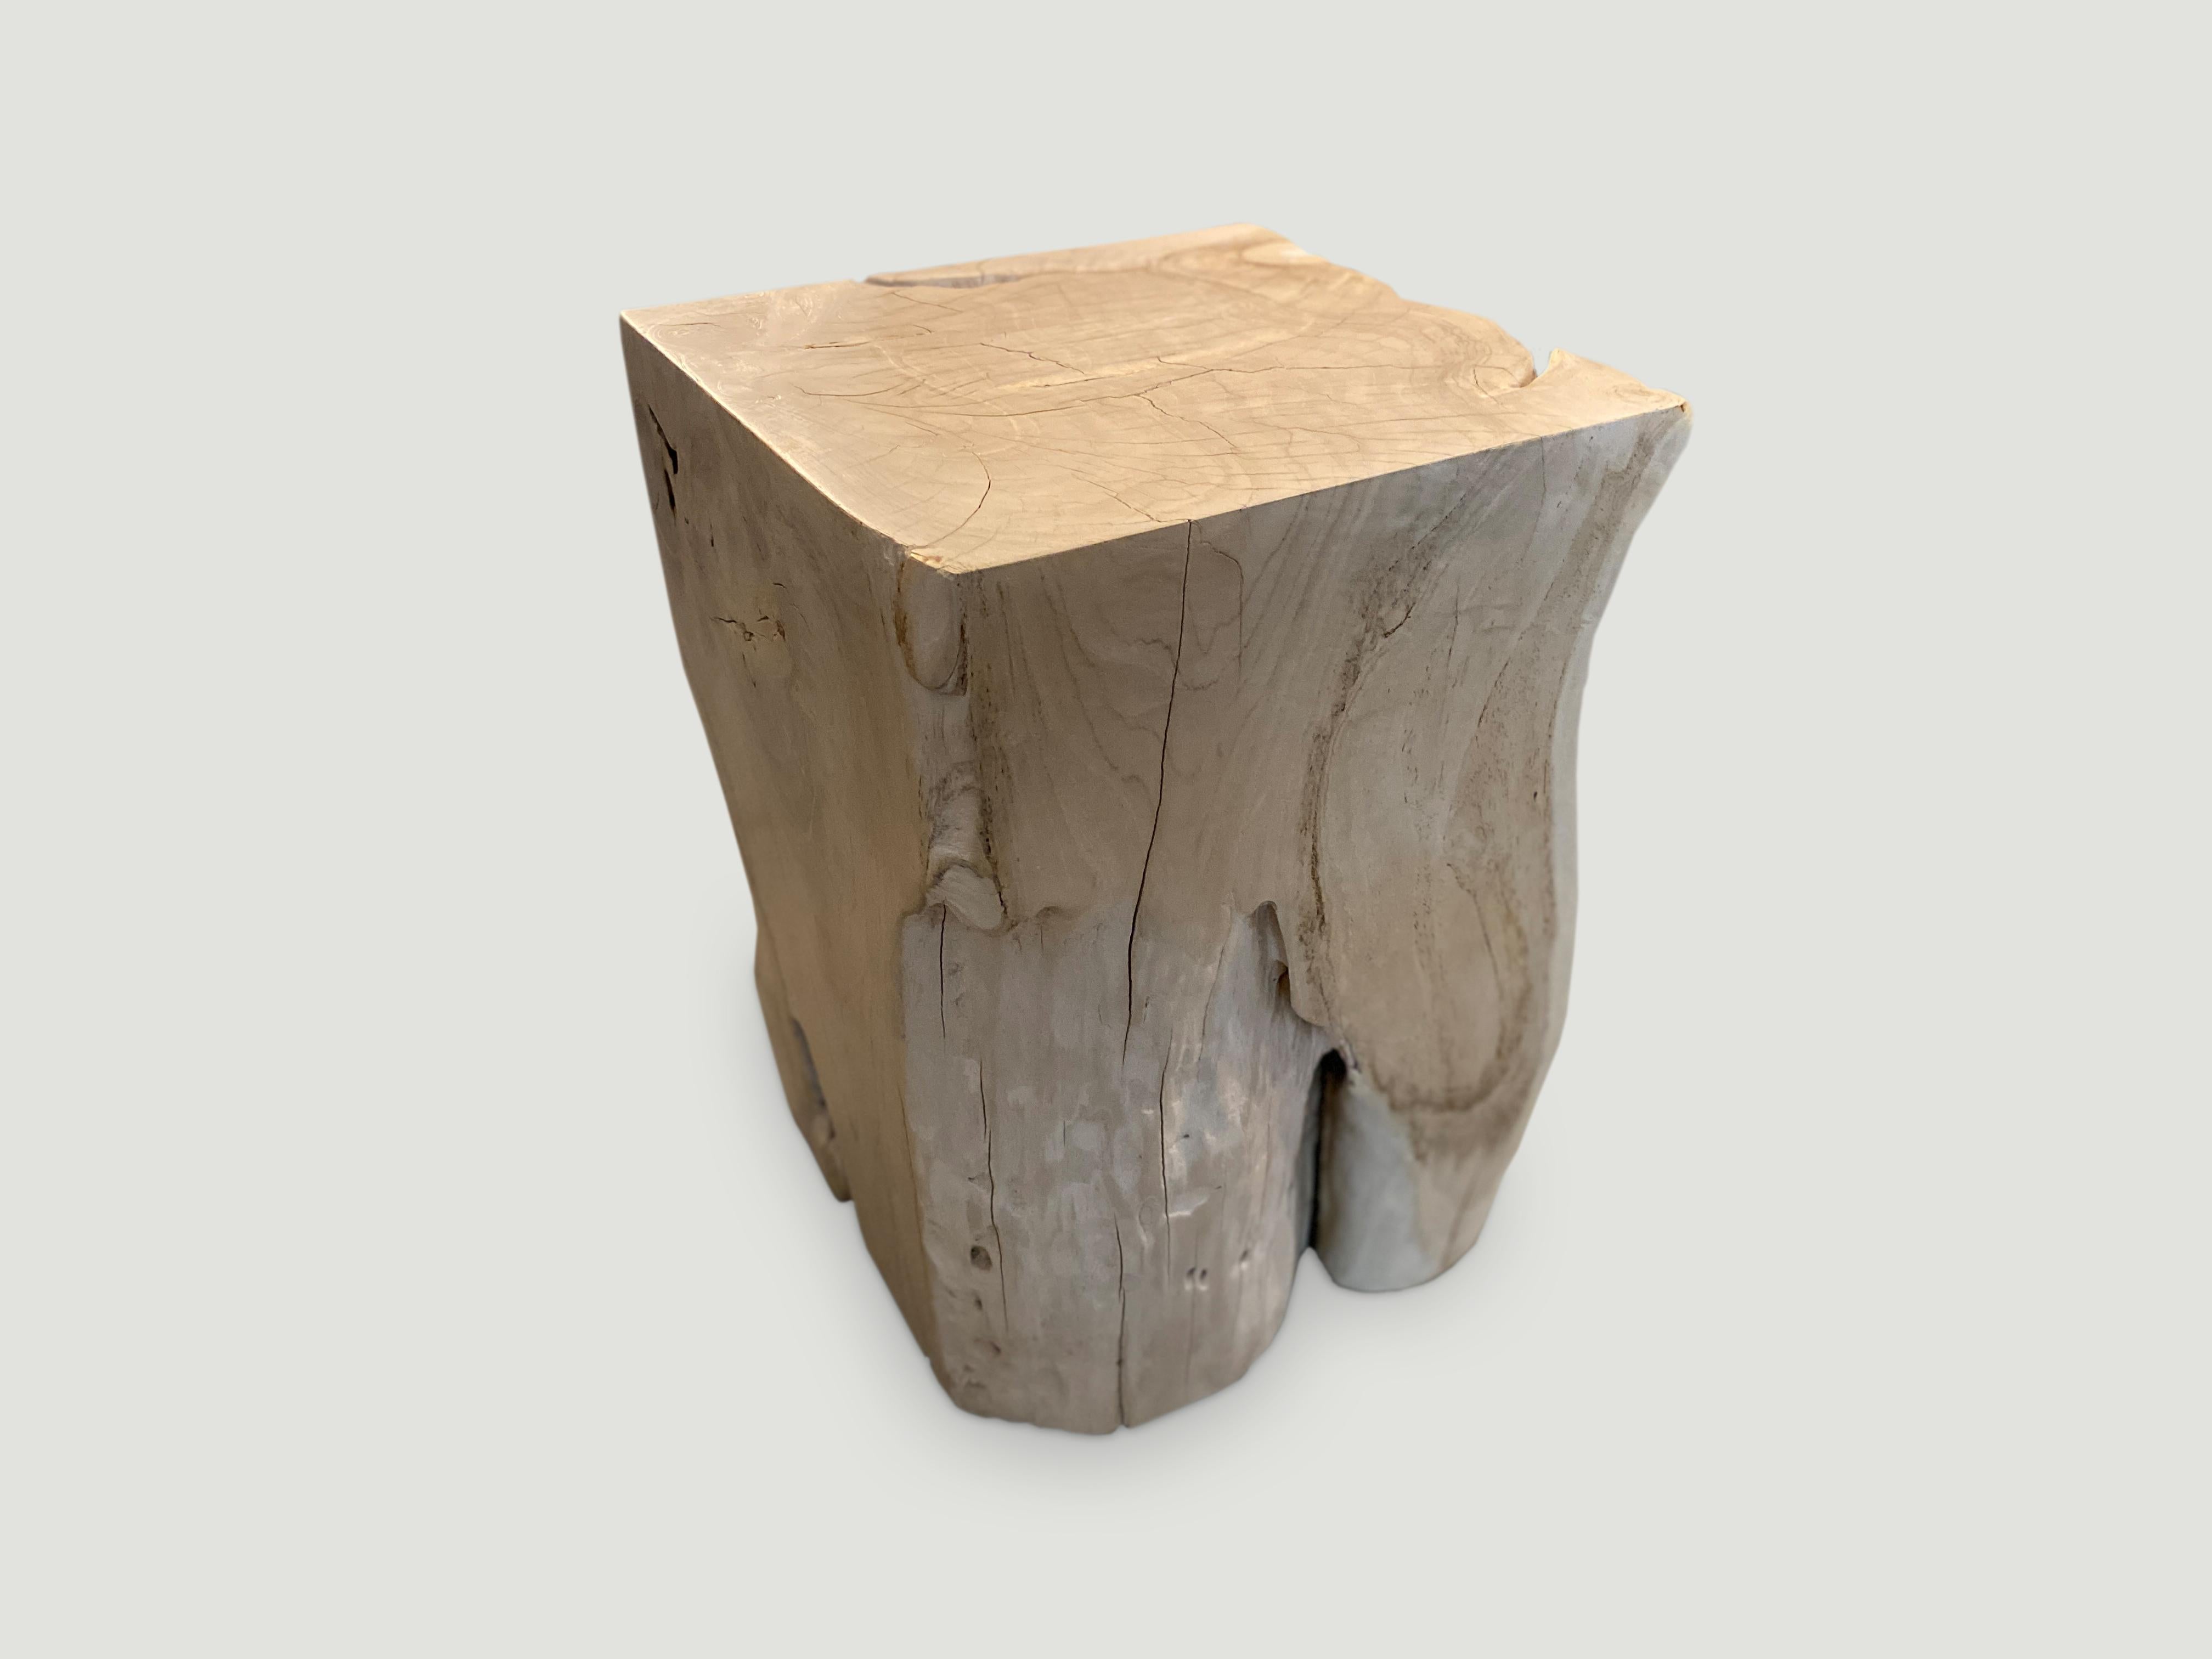 Reclaimed teak wood side table, hand carved whilst respecting the natural organic wood. Bleached to a bone finish. We have a collection. All unique. The price and size reflect the one shown. Also available charred.

The St. Barts Collection